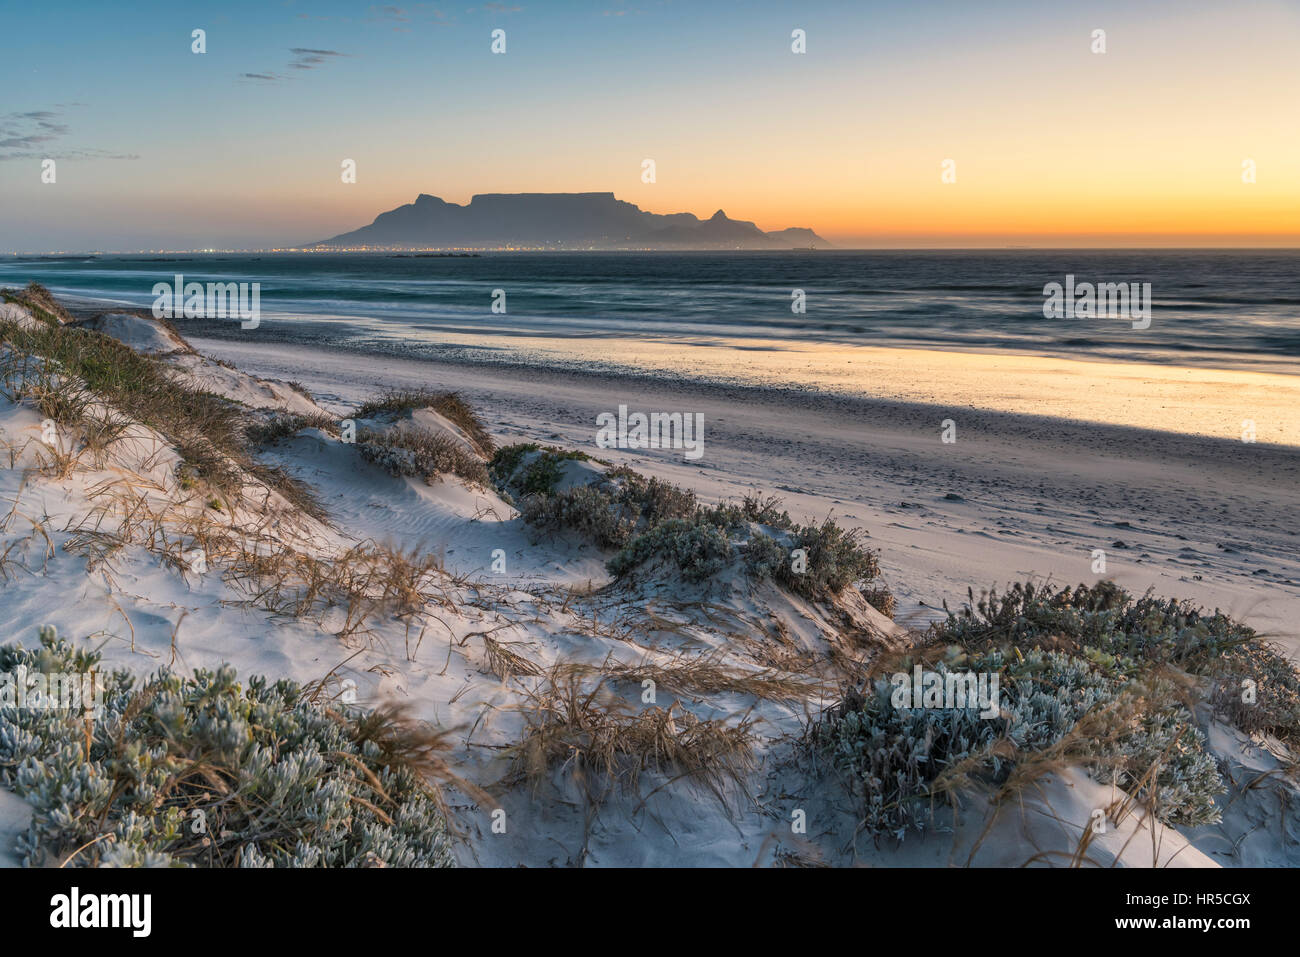 View of Table Mountain at Sunset from Big Bay, Bloubergstrand, Cape Town, South Africa Stock Photo